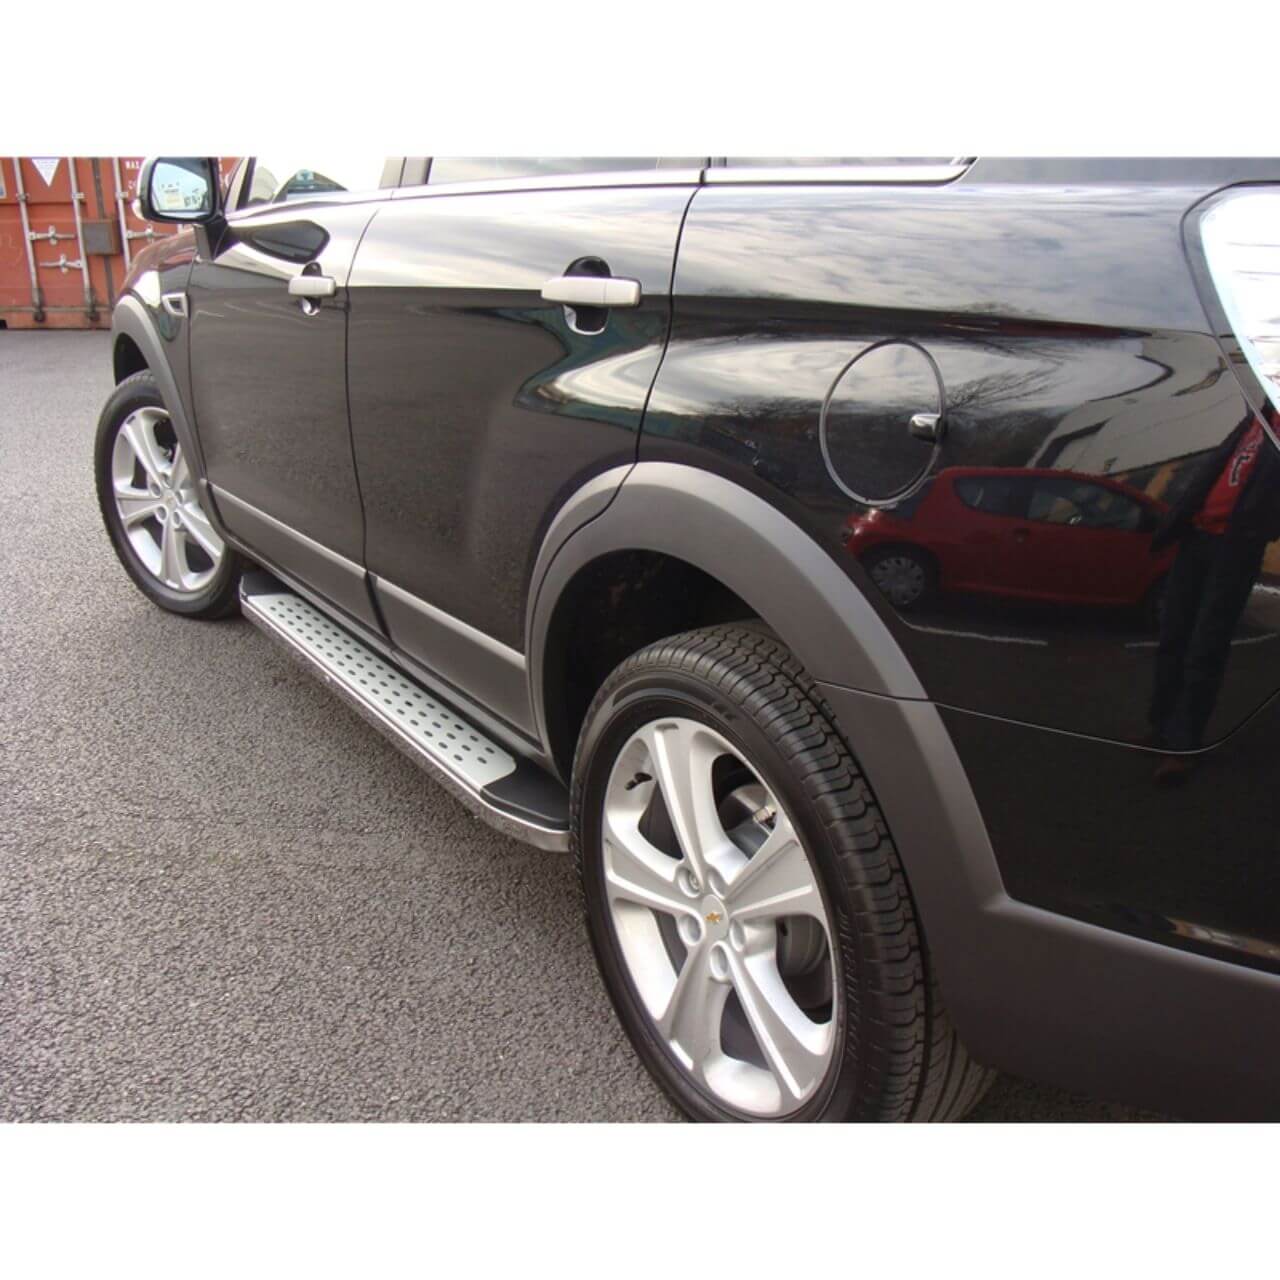 Freedom Side Steps Running Boards for Chevrolet Captiva 2006-2018 -  - sold by Direct4x4